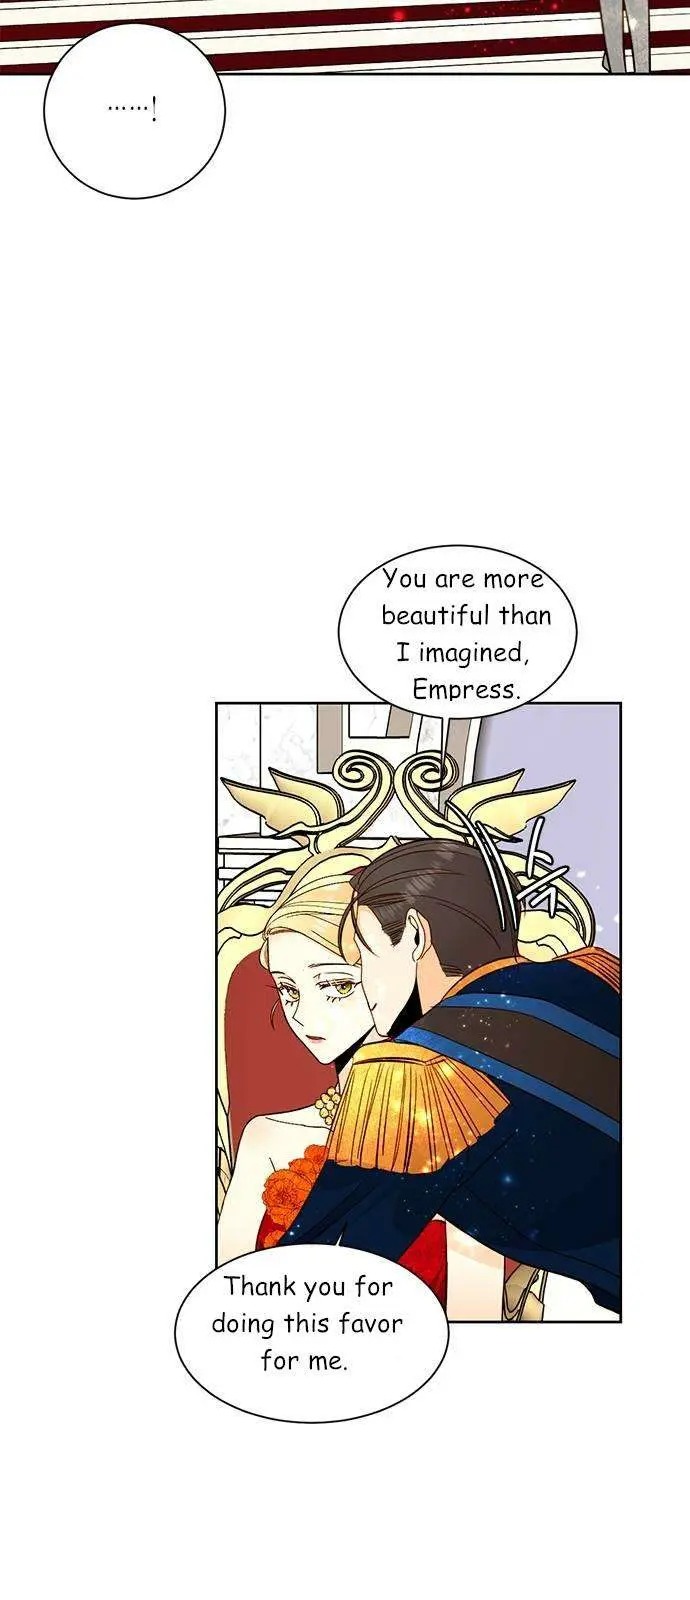 Remarried Empress - chapter 32 - #2